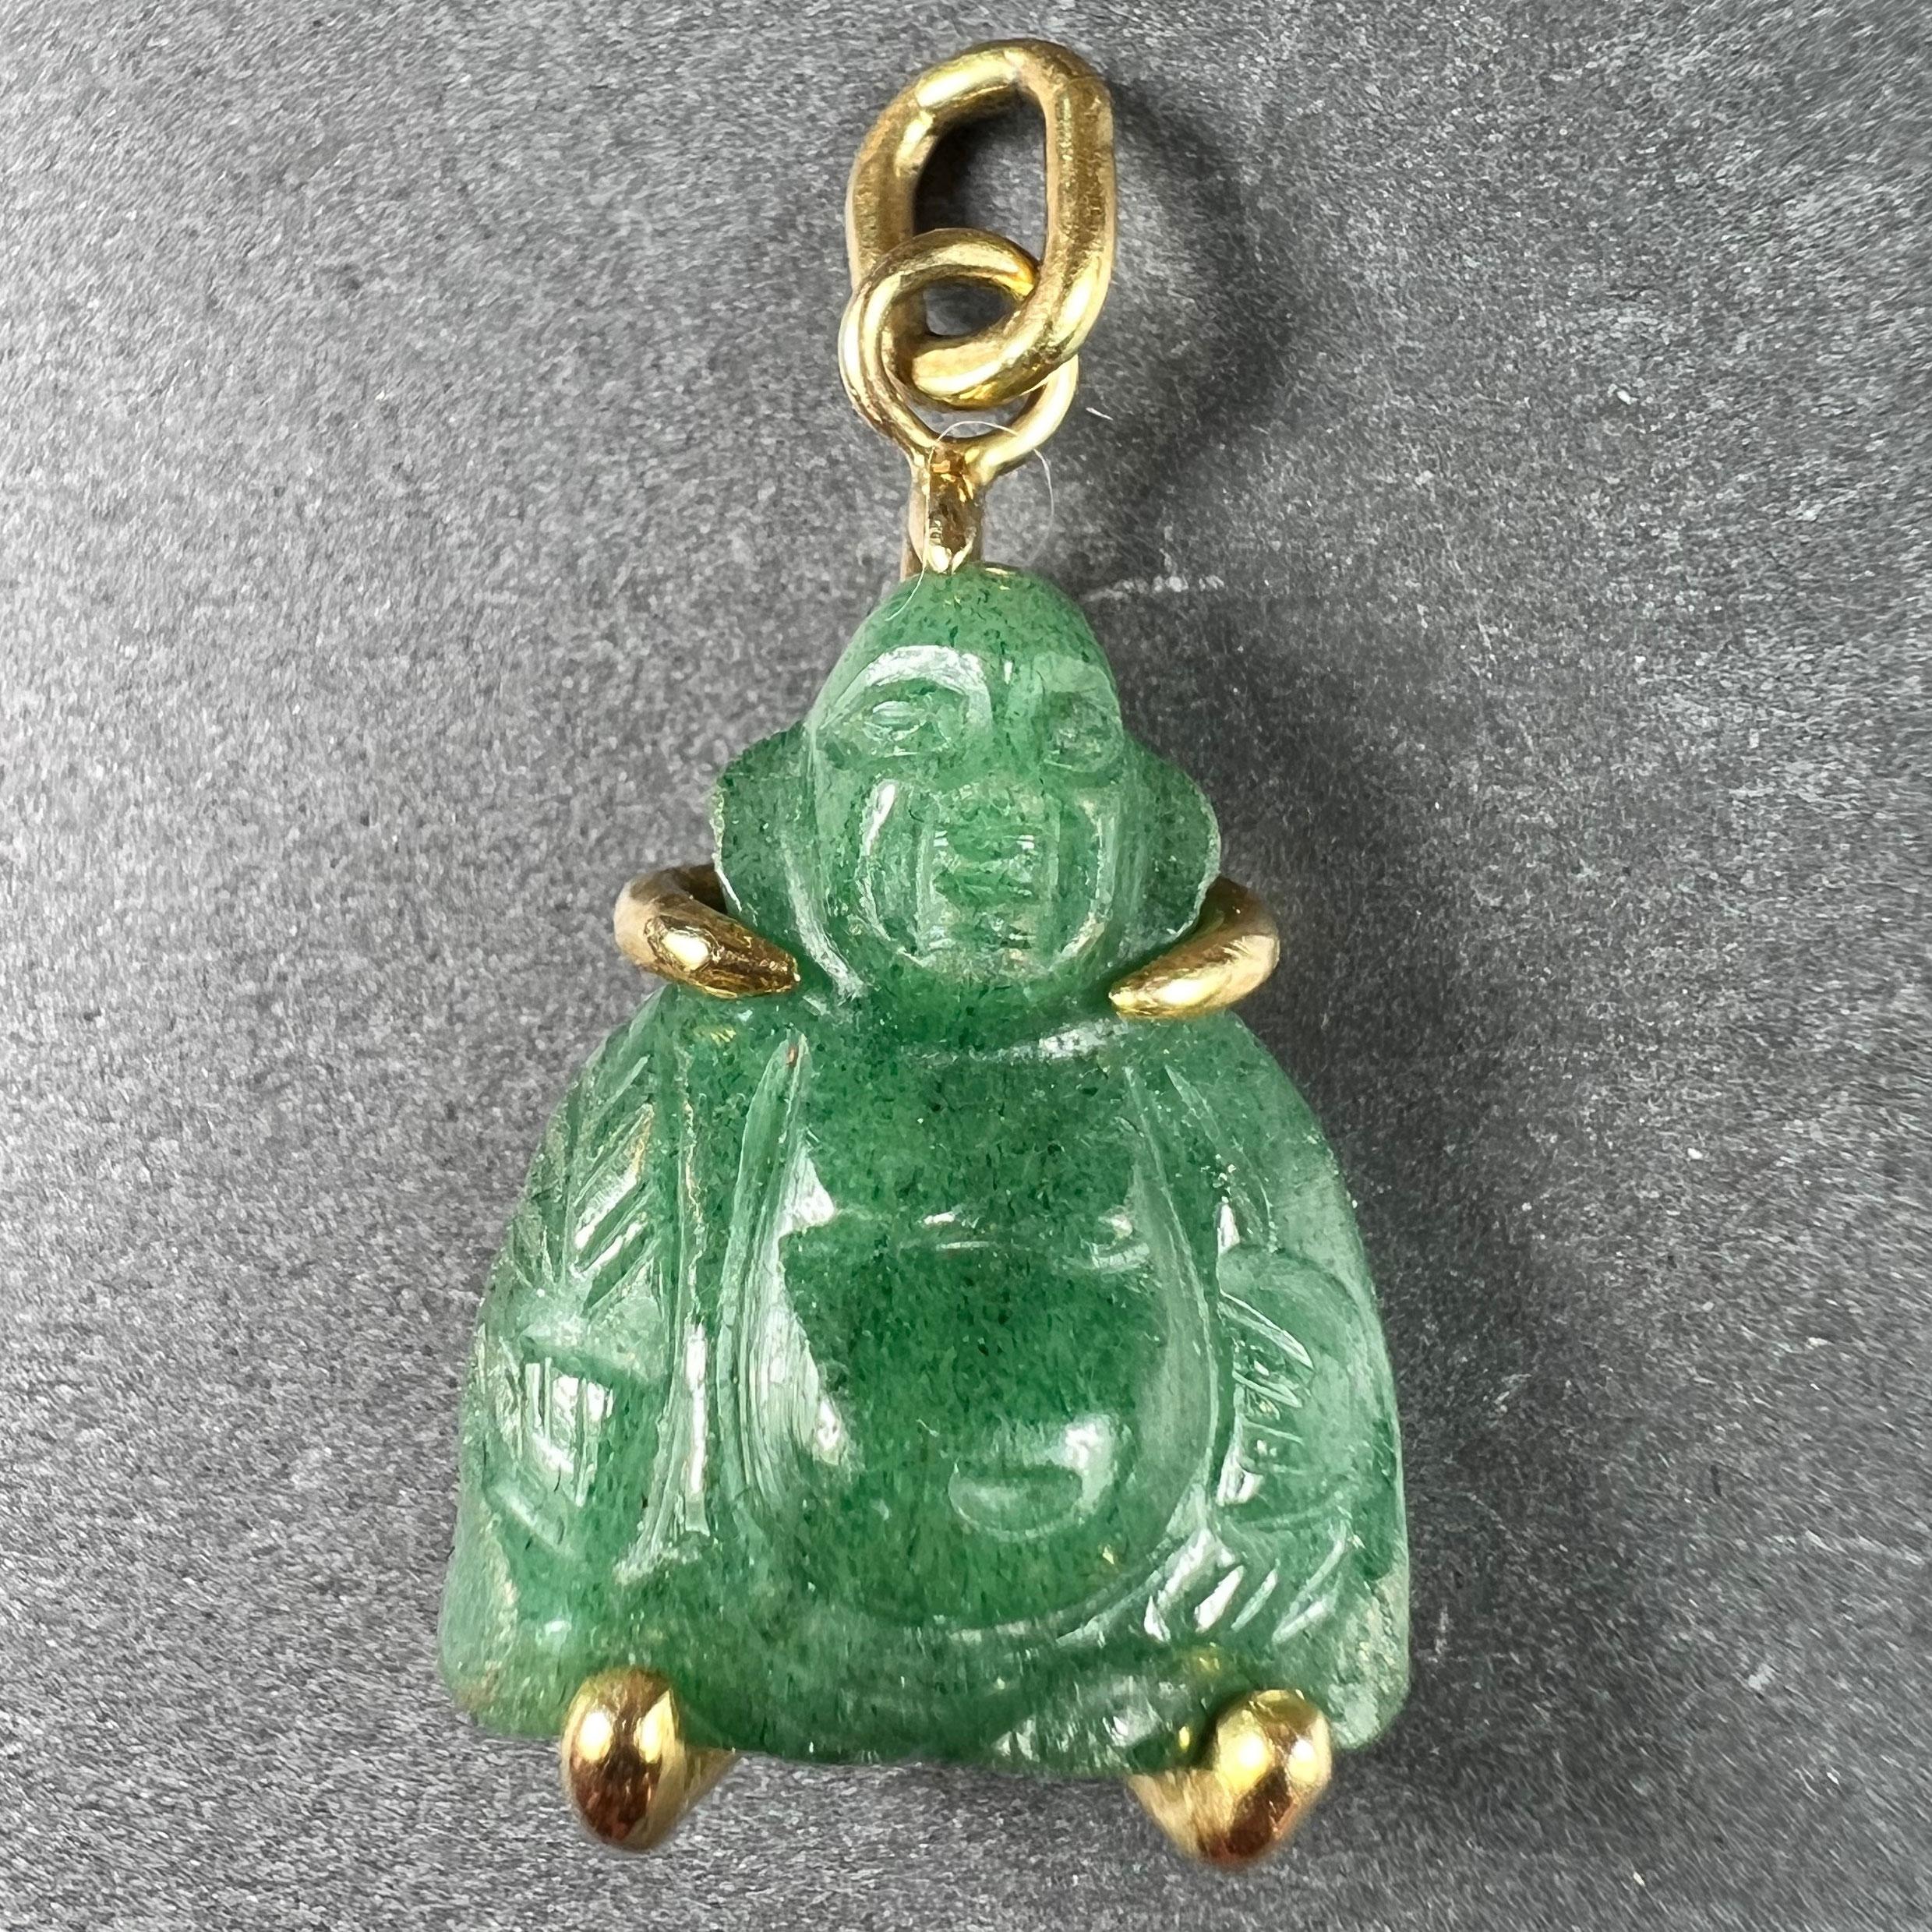 An 18 karat (18K) yellow gold charm pendant designed as a carved green aventurine quartz buddha. Unmarked but tested as 18 karat gold.

Dimensions: 2.6 x 1.6 x 0.9 cm (not including jump ring)
Weight: 4.15 grams
(Chain not included) 